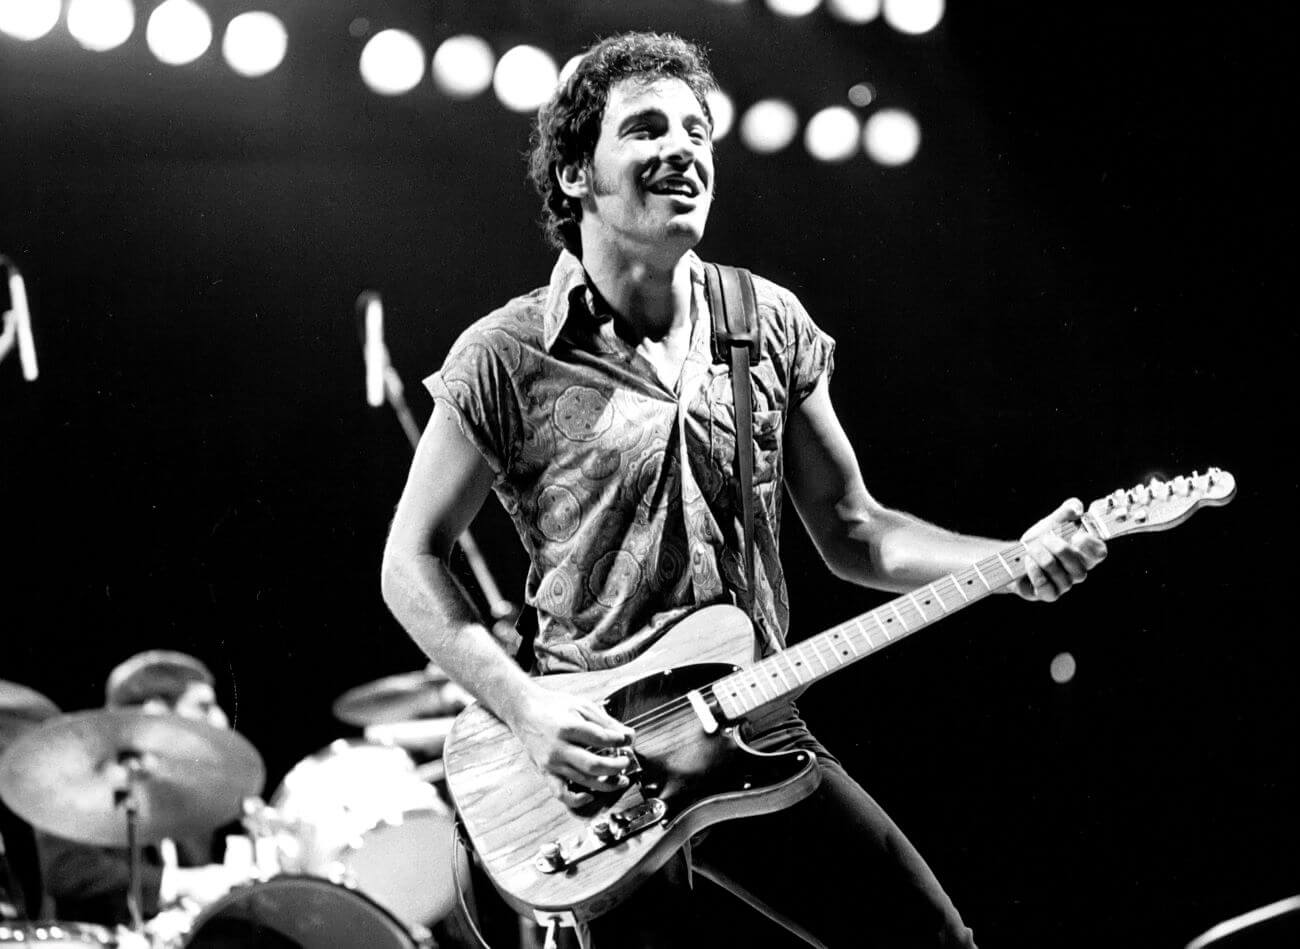 A black and white picture of Bruce Springsteen on a stage playing guitar.